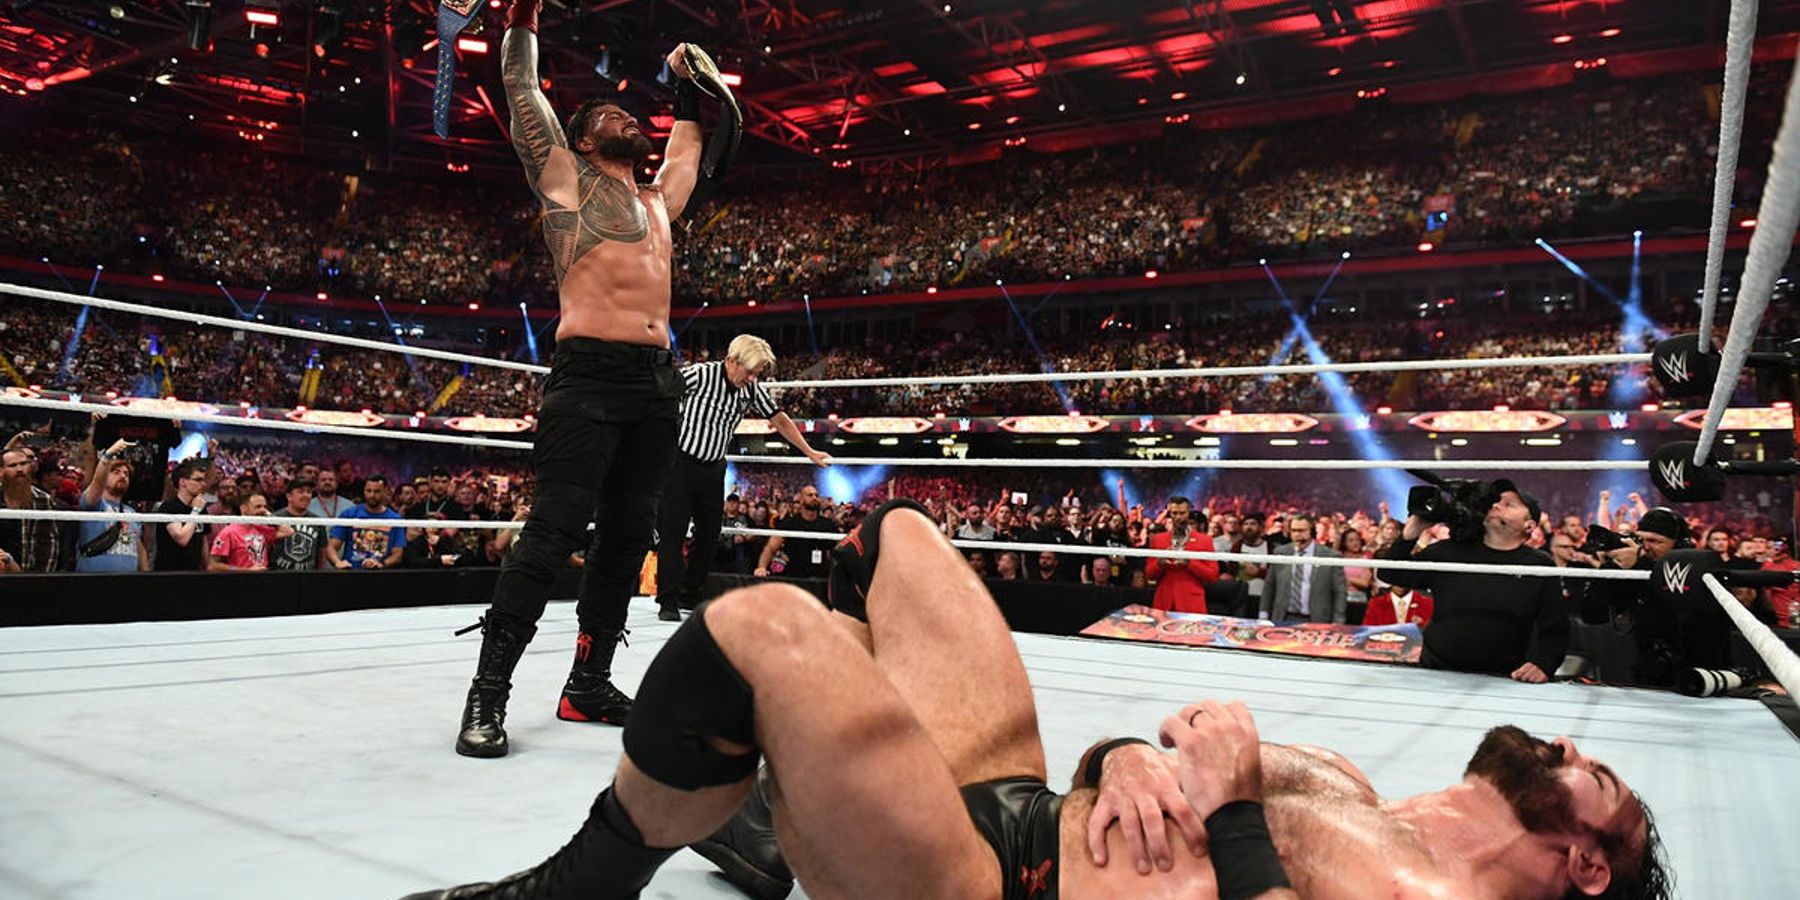 Roman Reigns celebrates his victory over Drew McIntyre at WWE Clash At The Castle.